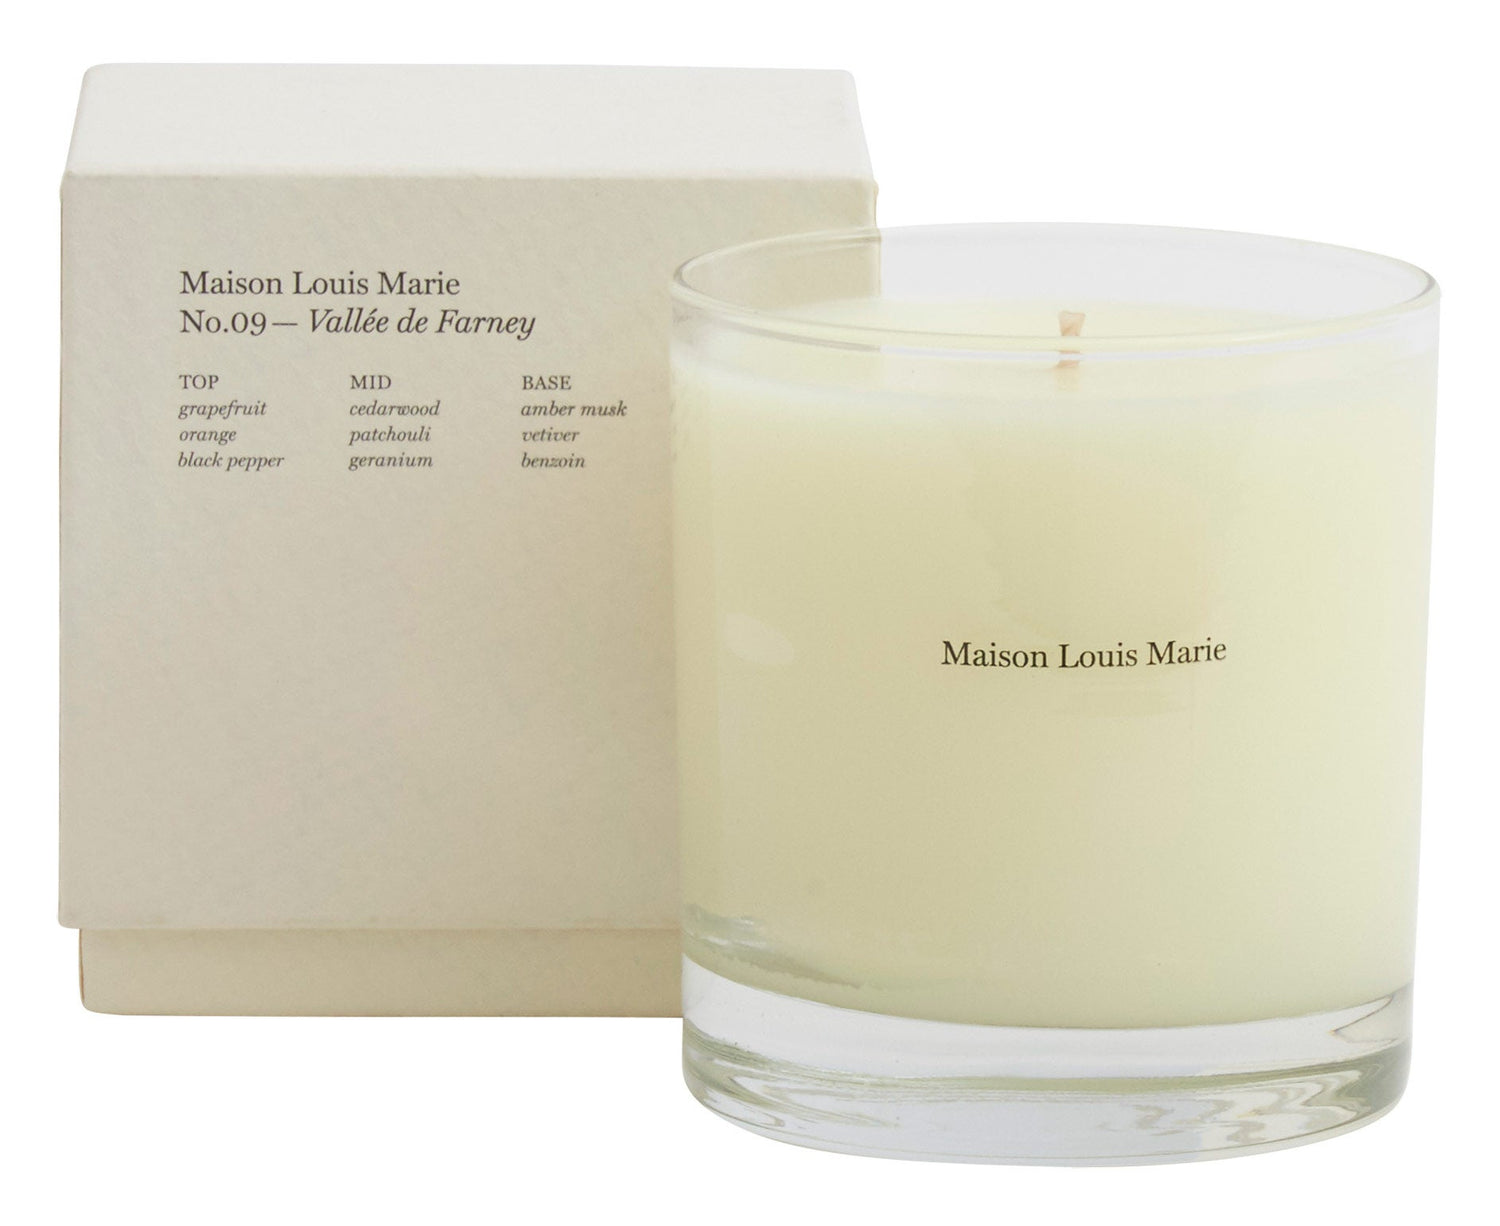 Maison Louise Marie - Cassis Candle in Portland, OR